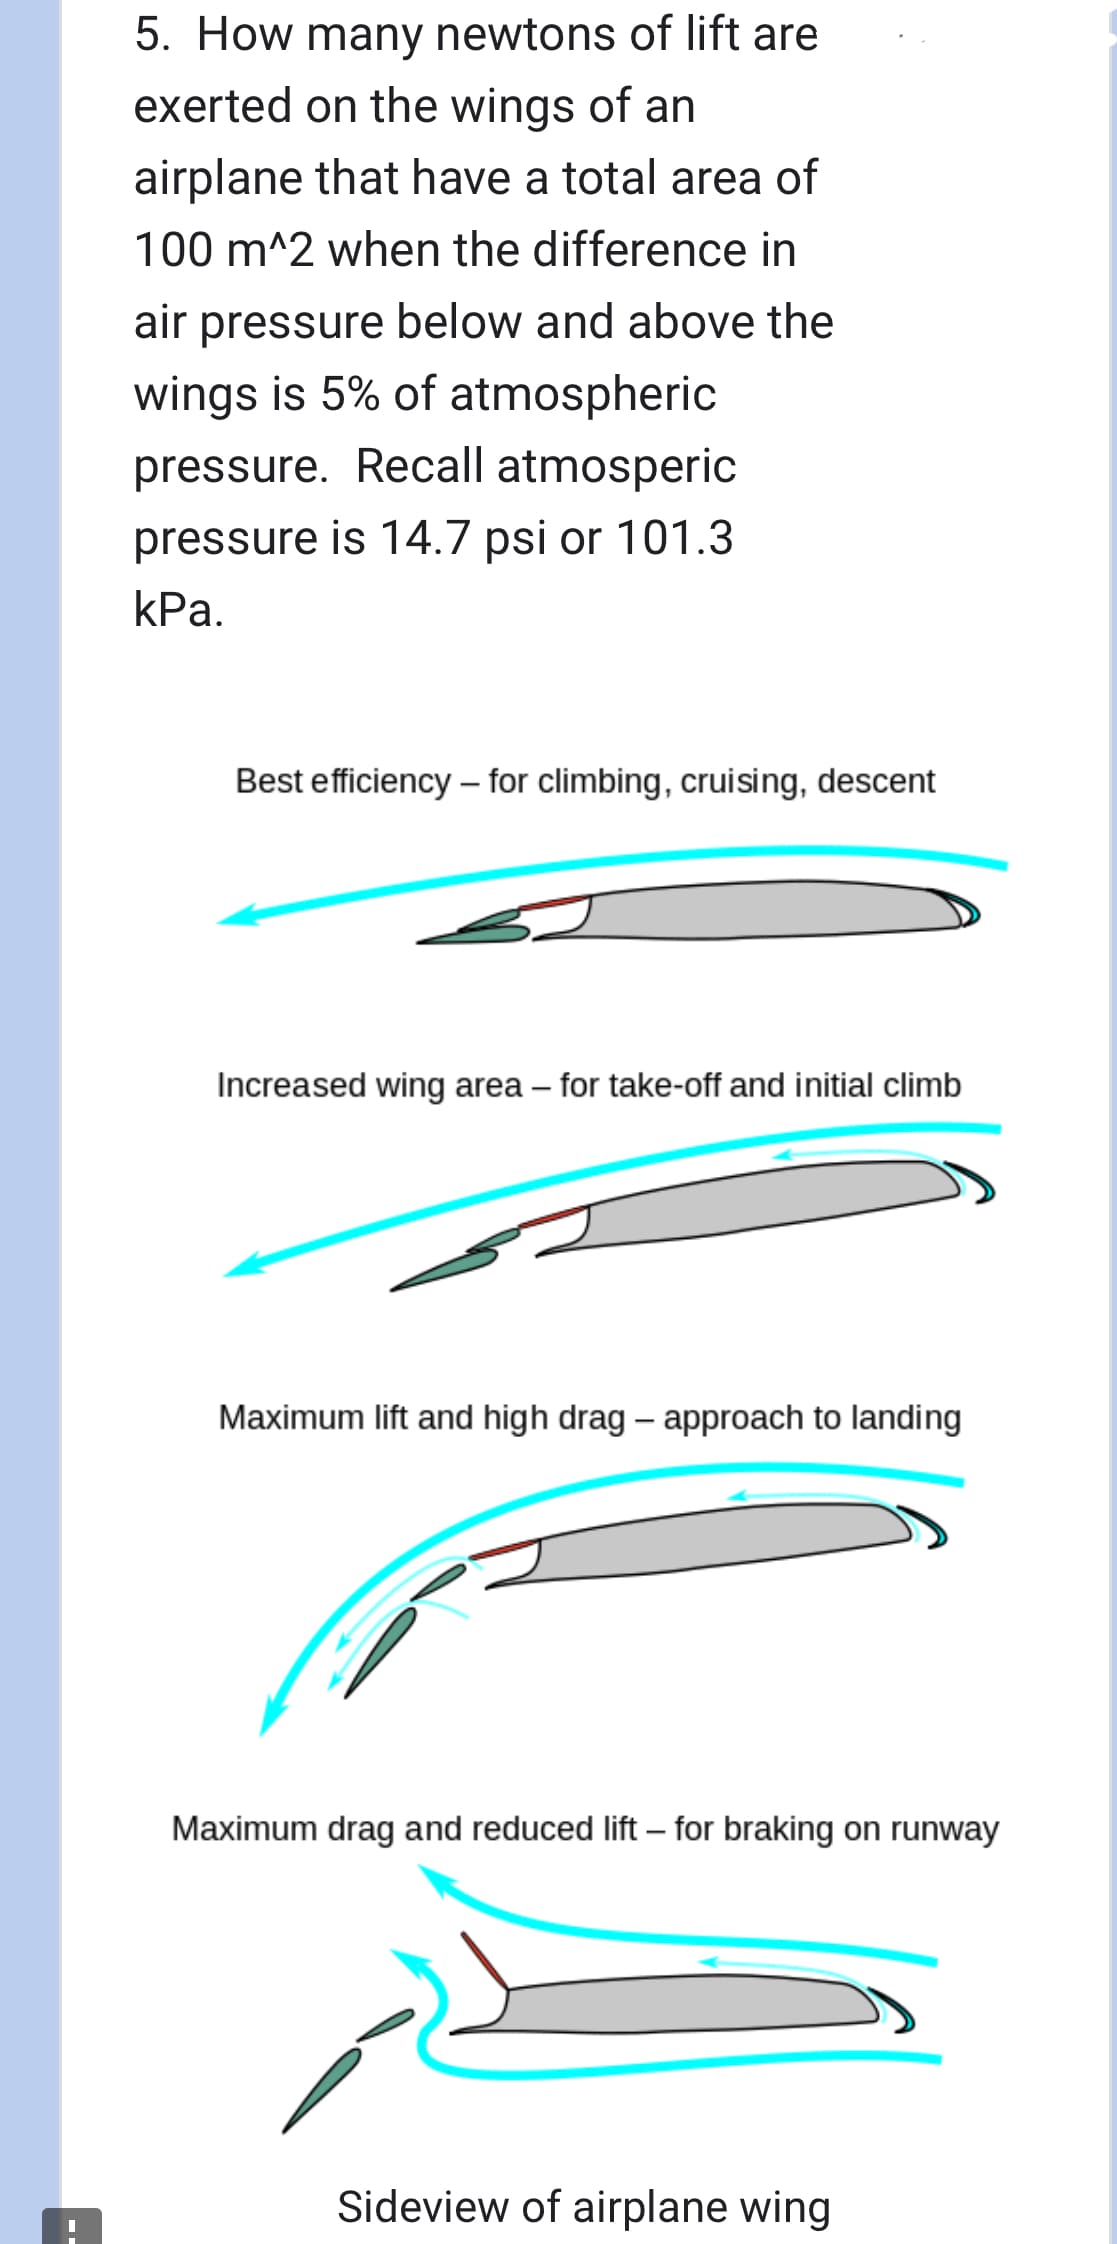 5. How many newtons of lift are
exerted on the wings of an
airplane that have a total area of
100 m^2 when the difference in
air pressure below and above the
wings is 5% of atmospheric
pressure. Recall atmosperic
pressure is 14.7 psi or 101.3
kPa.
Best efficiency - for climbing, cruising, descent
Increased wing area - for take-off and initial climb
Maximum lift and high drag - approach to landing
Maximum drag and reduced lift - for braking on runway
Sideview of airplane wing